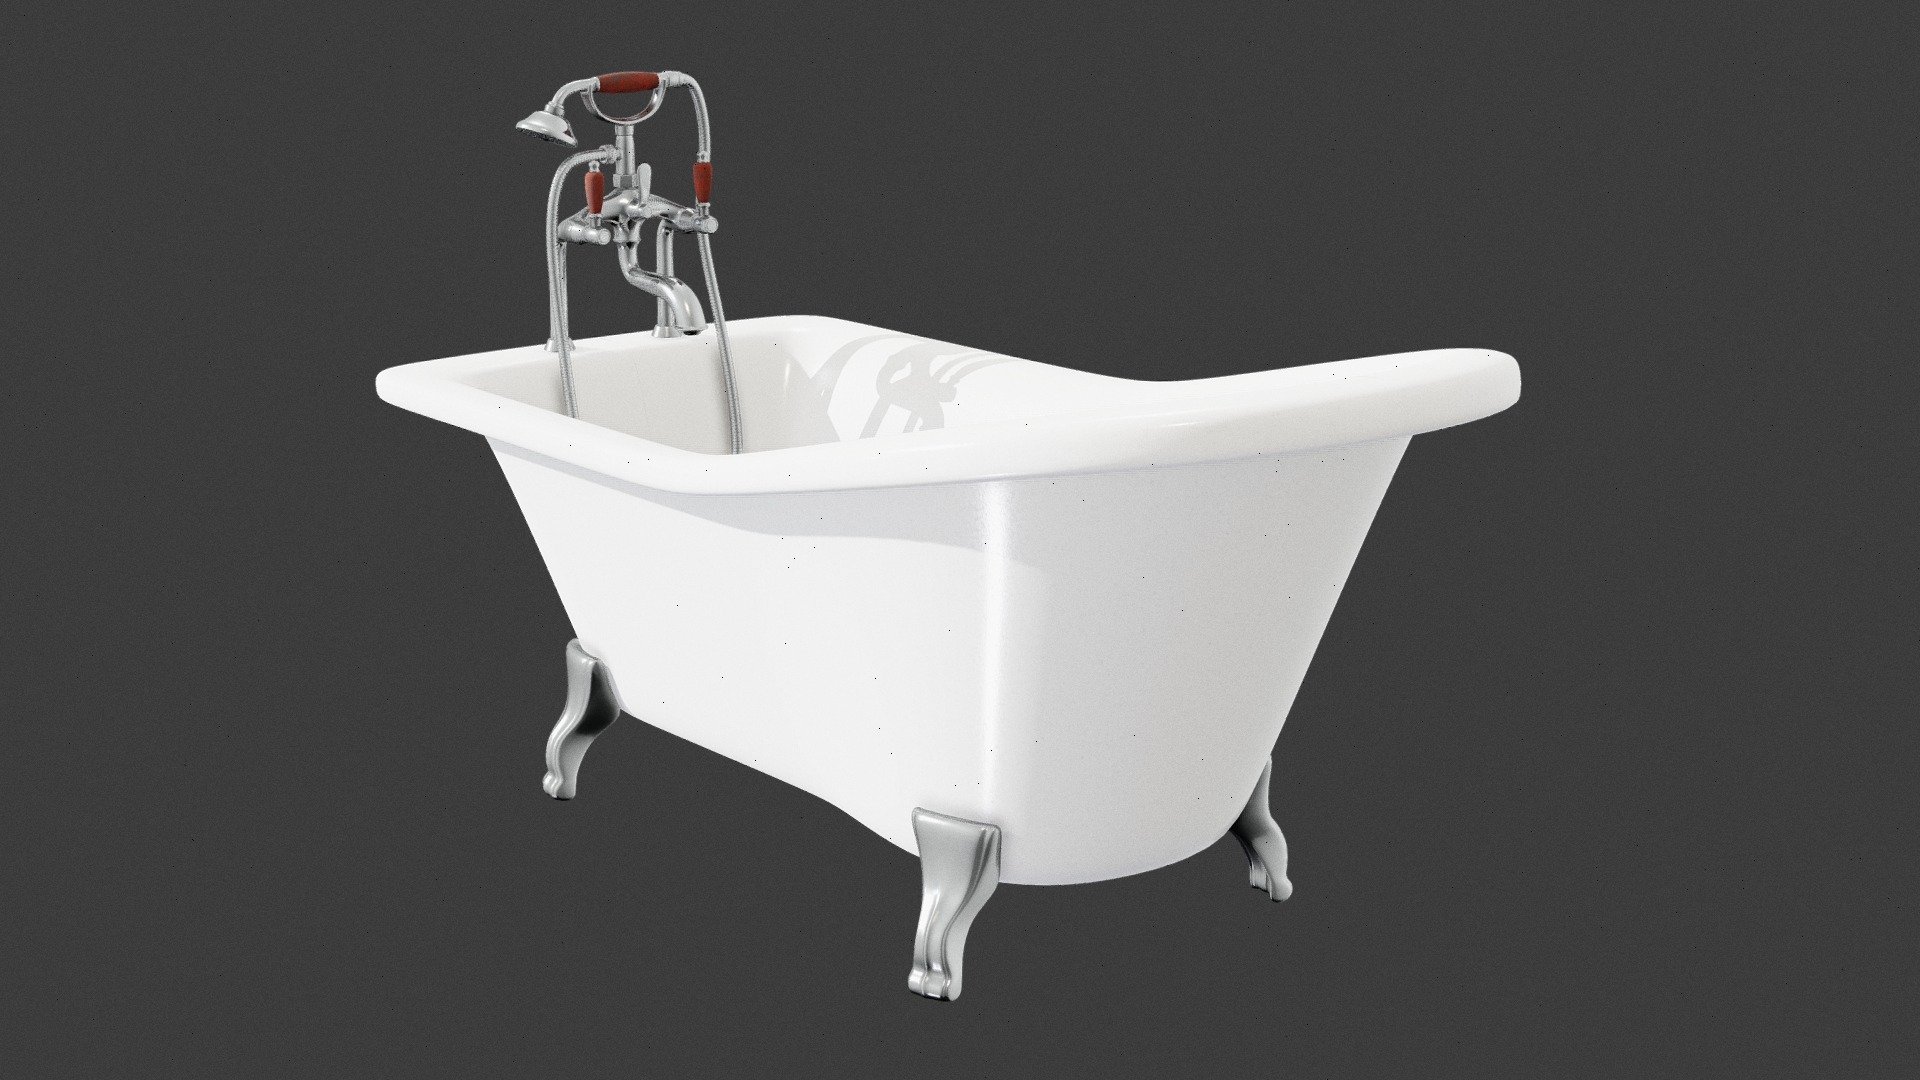 -no plugins/modifiers etc

-model fully UVs unwrapped 

-diffuse texture size: 8192x8192

-model was made in real size

-scene units measurement: millimeters

-dimensions: 64.6 H x 107.5 W x 55.1 D (cm)
 - mixerbath01 - 3D model by TypicCube 3d model